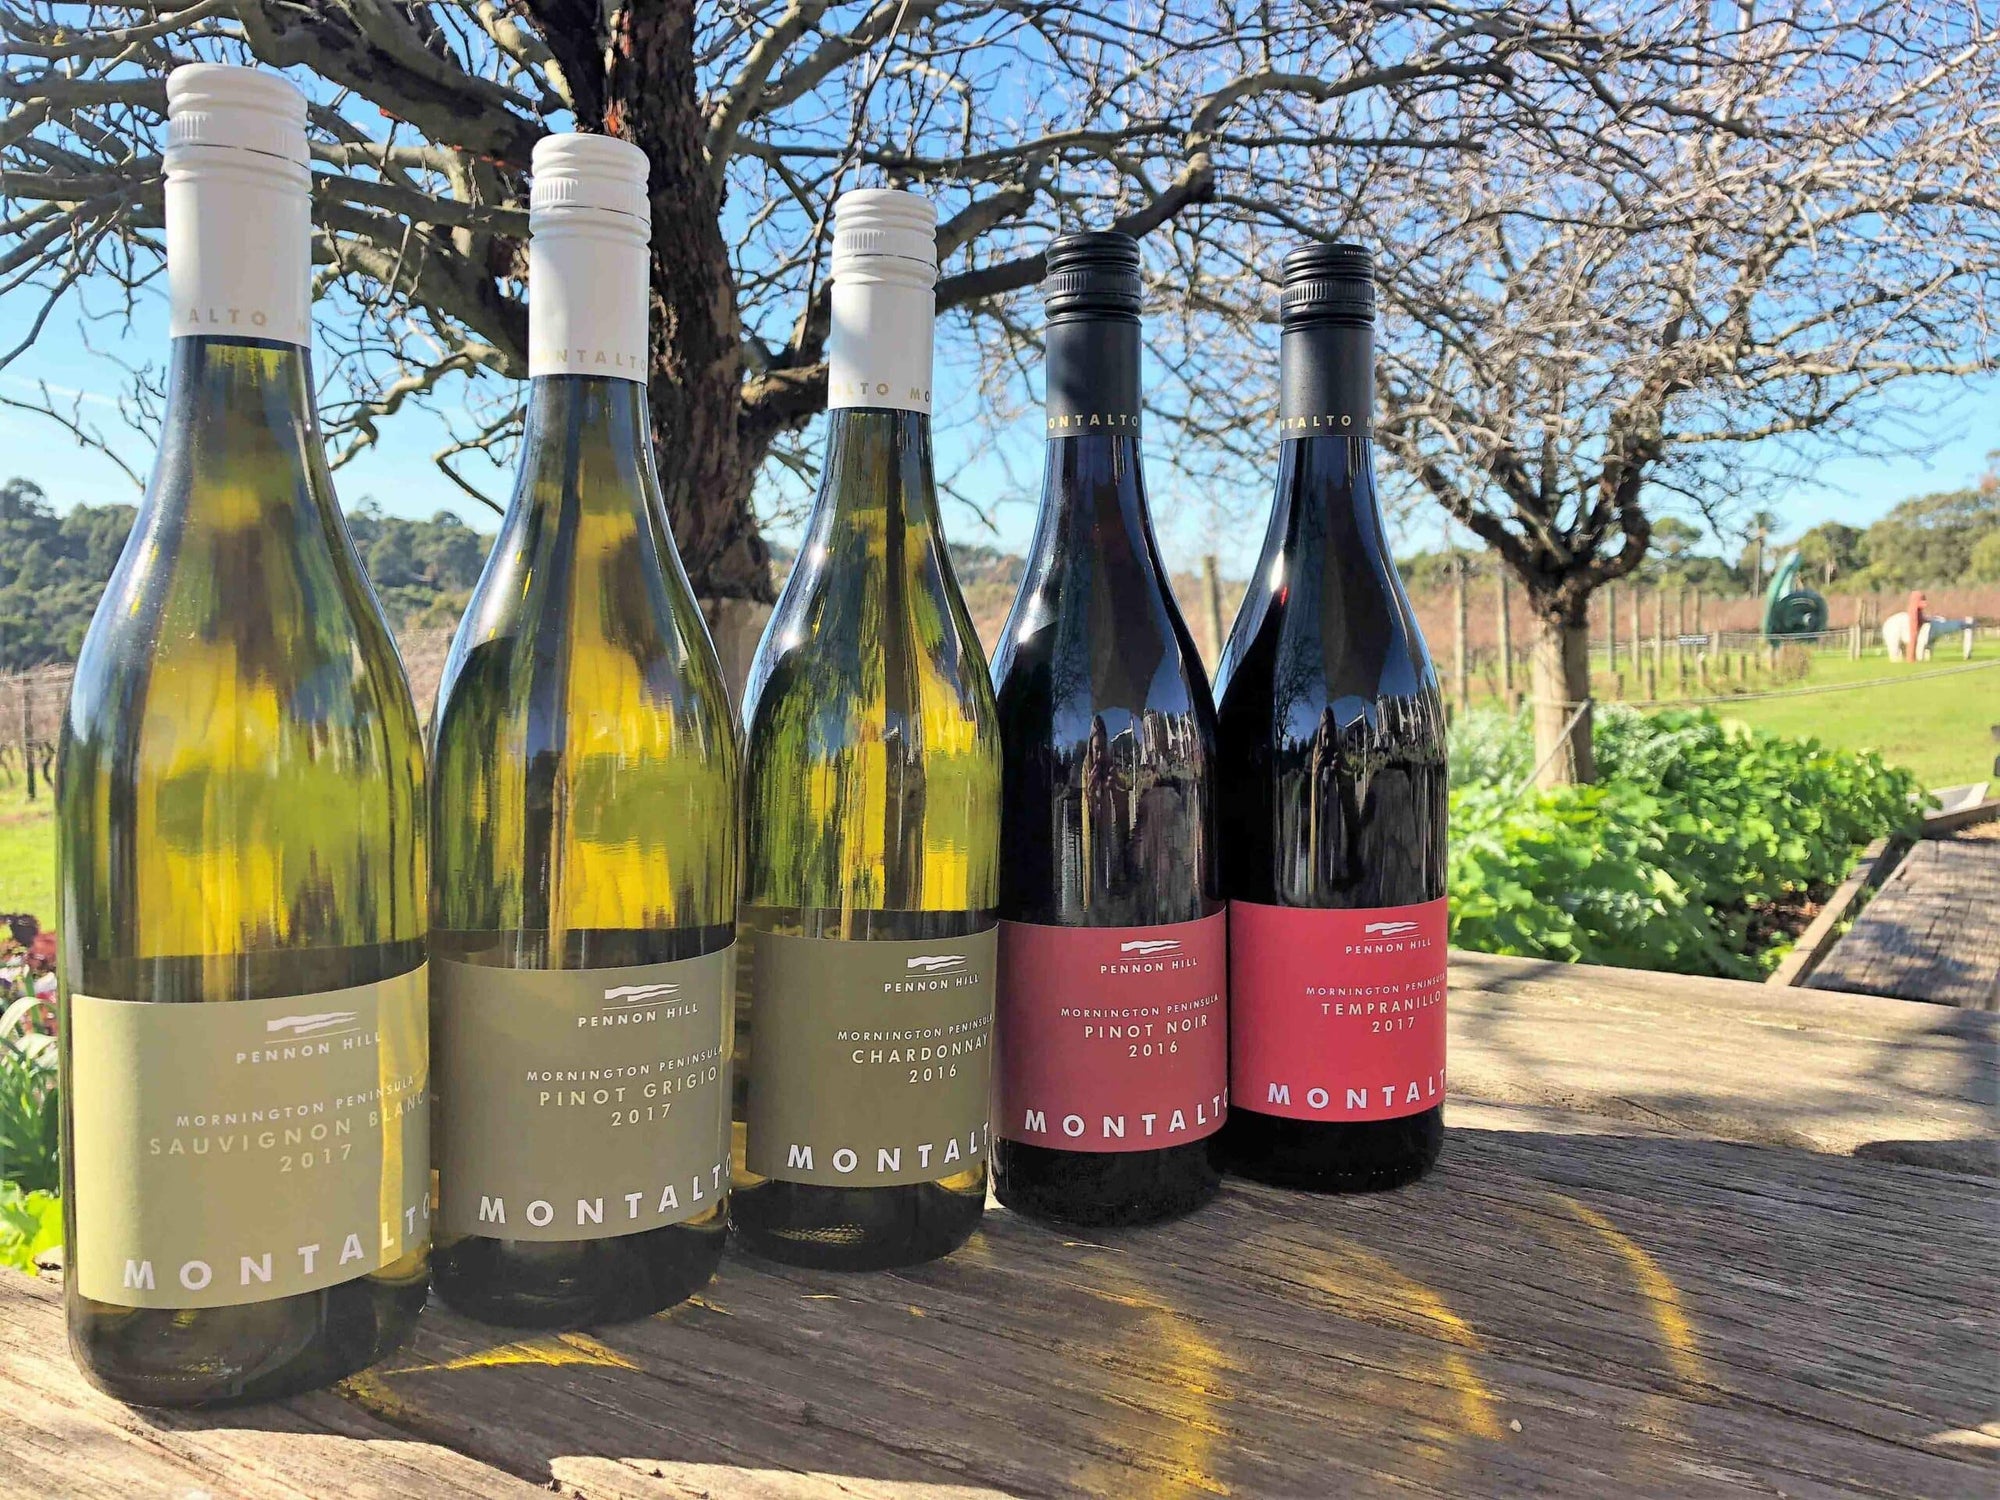 The 10 Best-Selling Montalto Wines in 2018